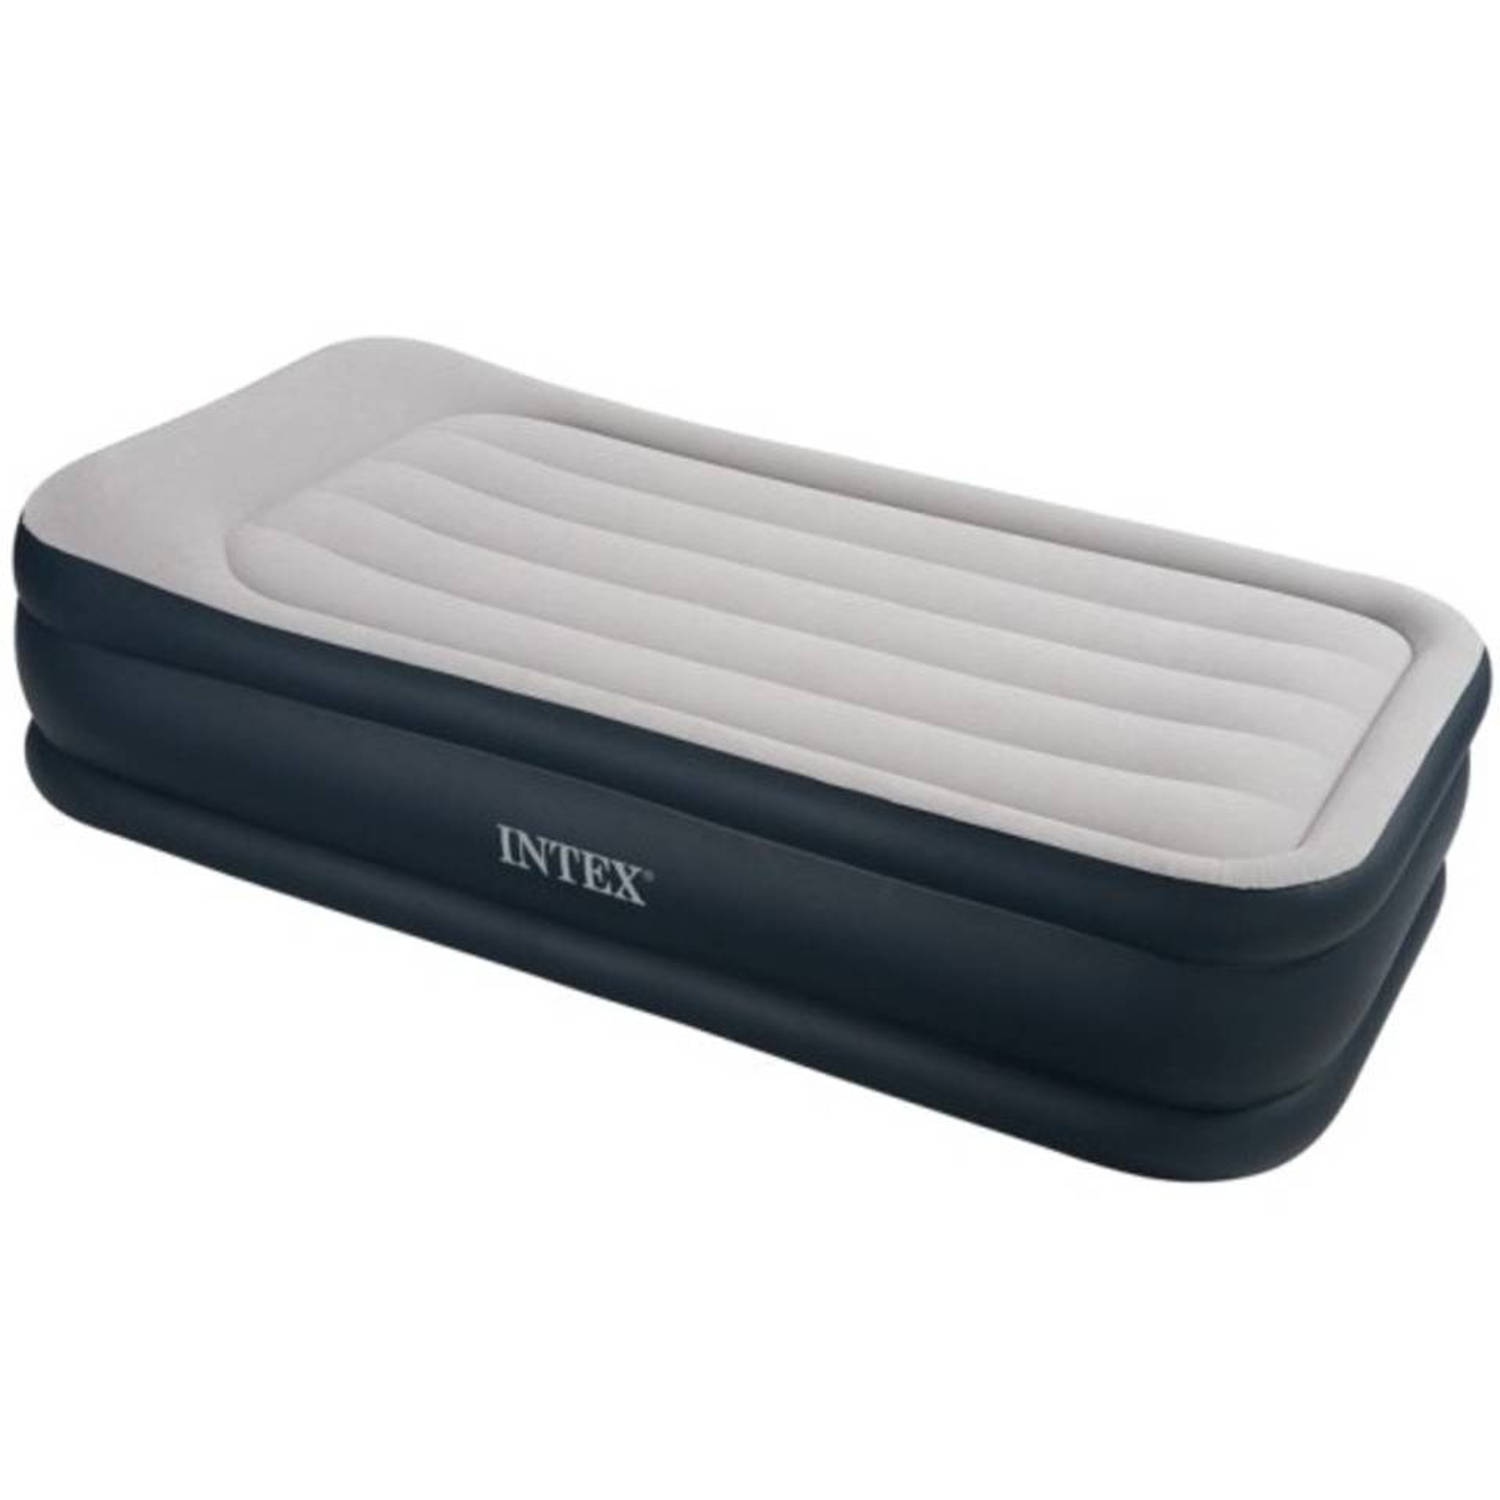 Intex Deluxe Pillow Rest Twin Luchtbed